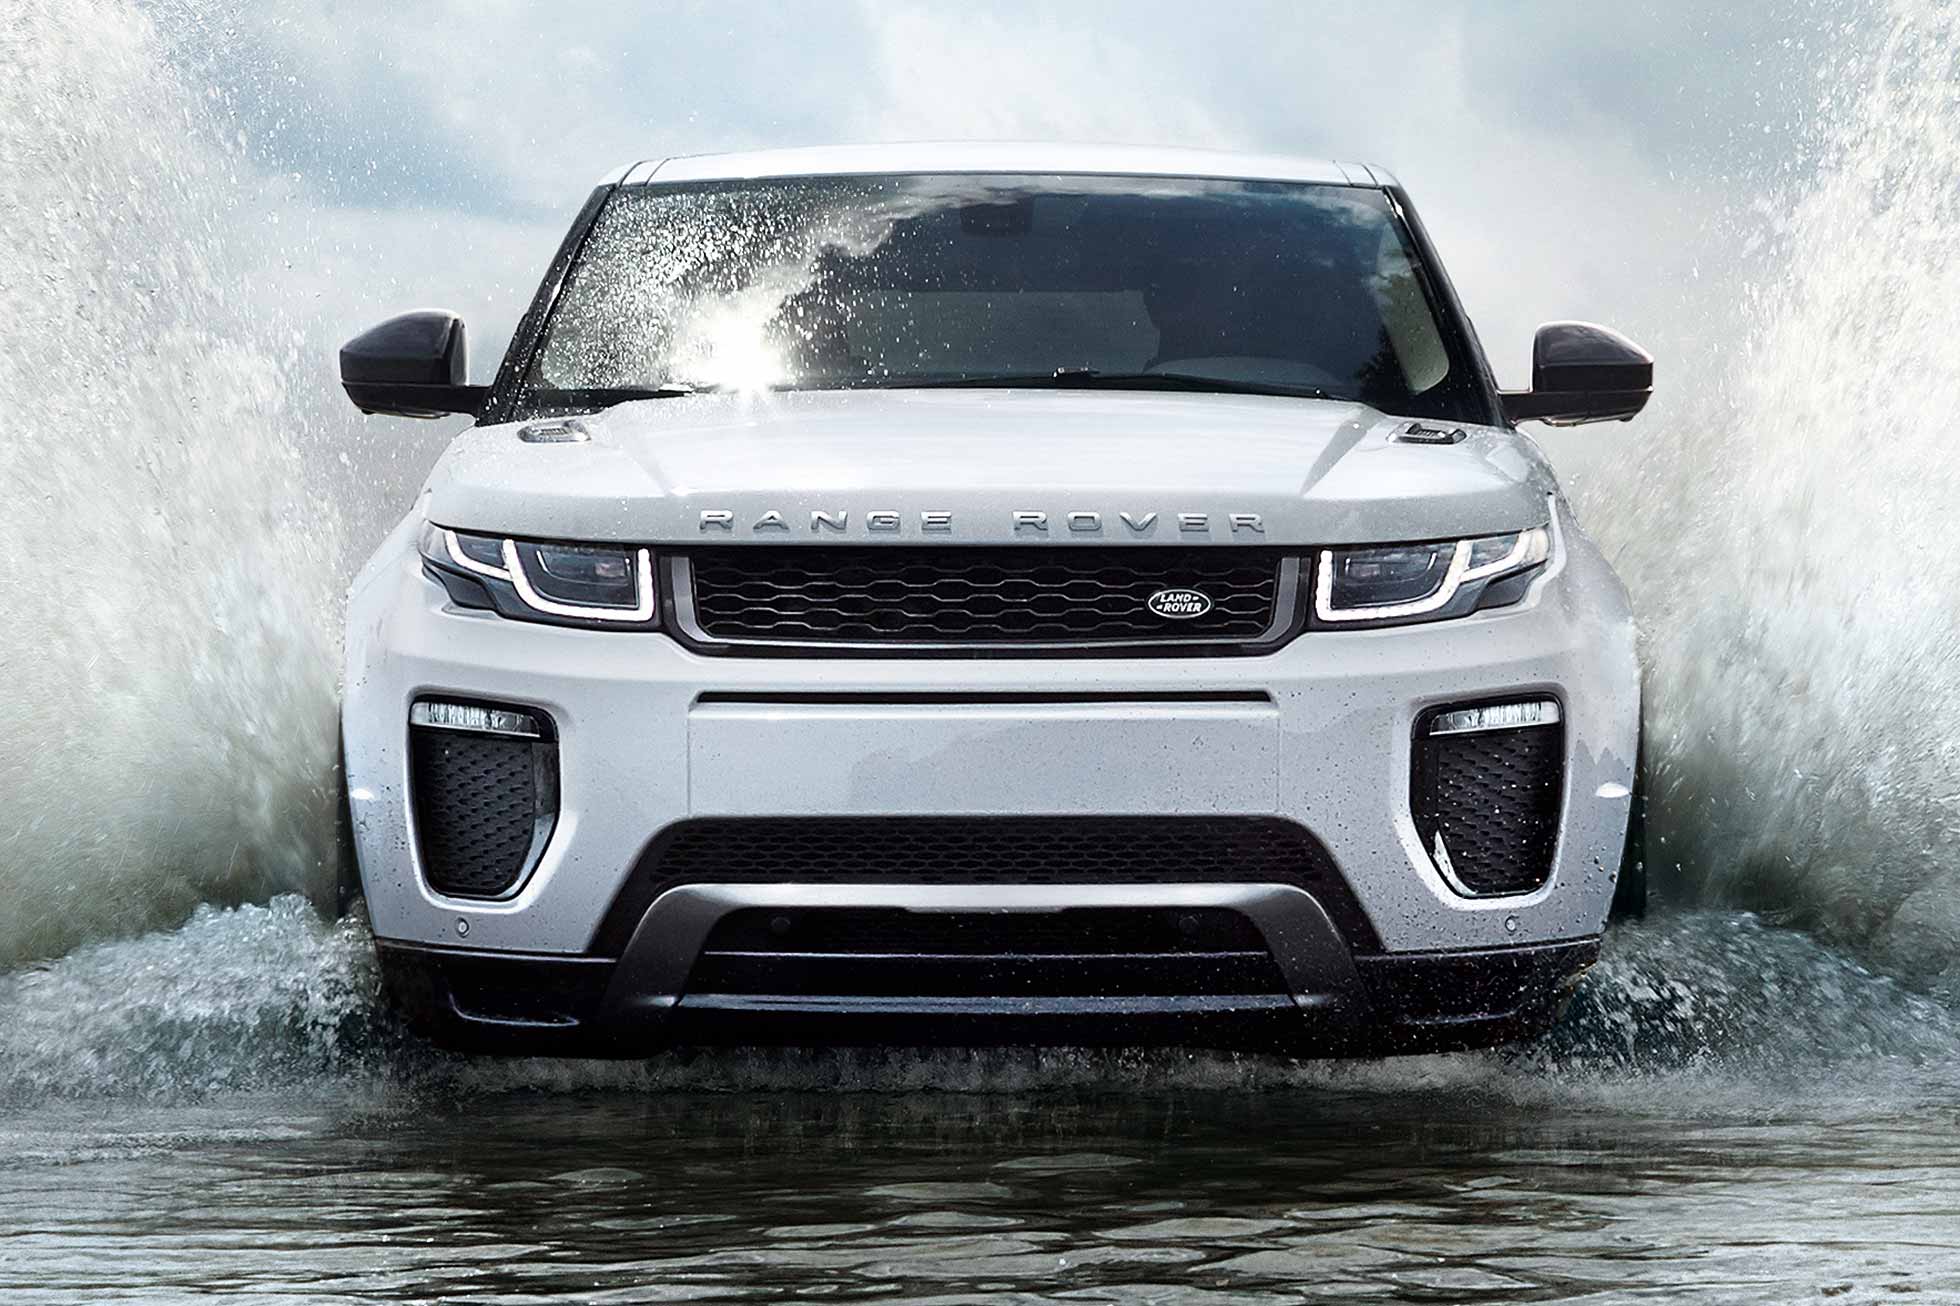 Range Rover Sport HST Picture. New Car Concepts